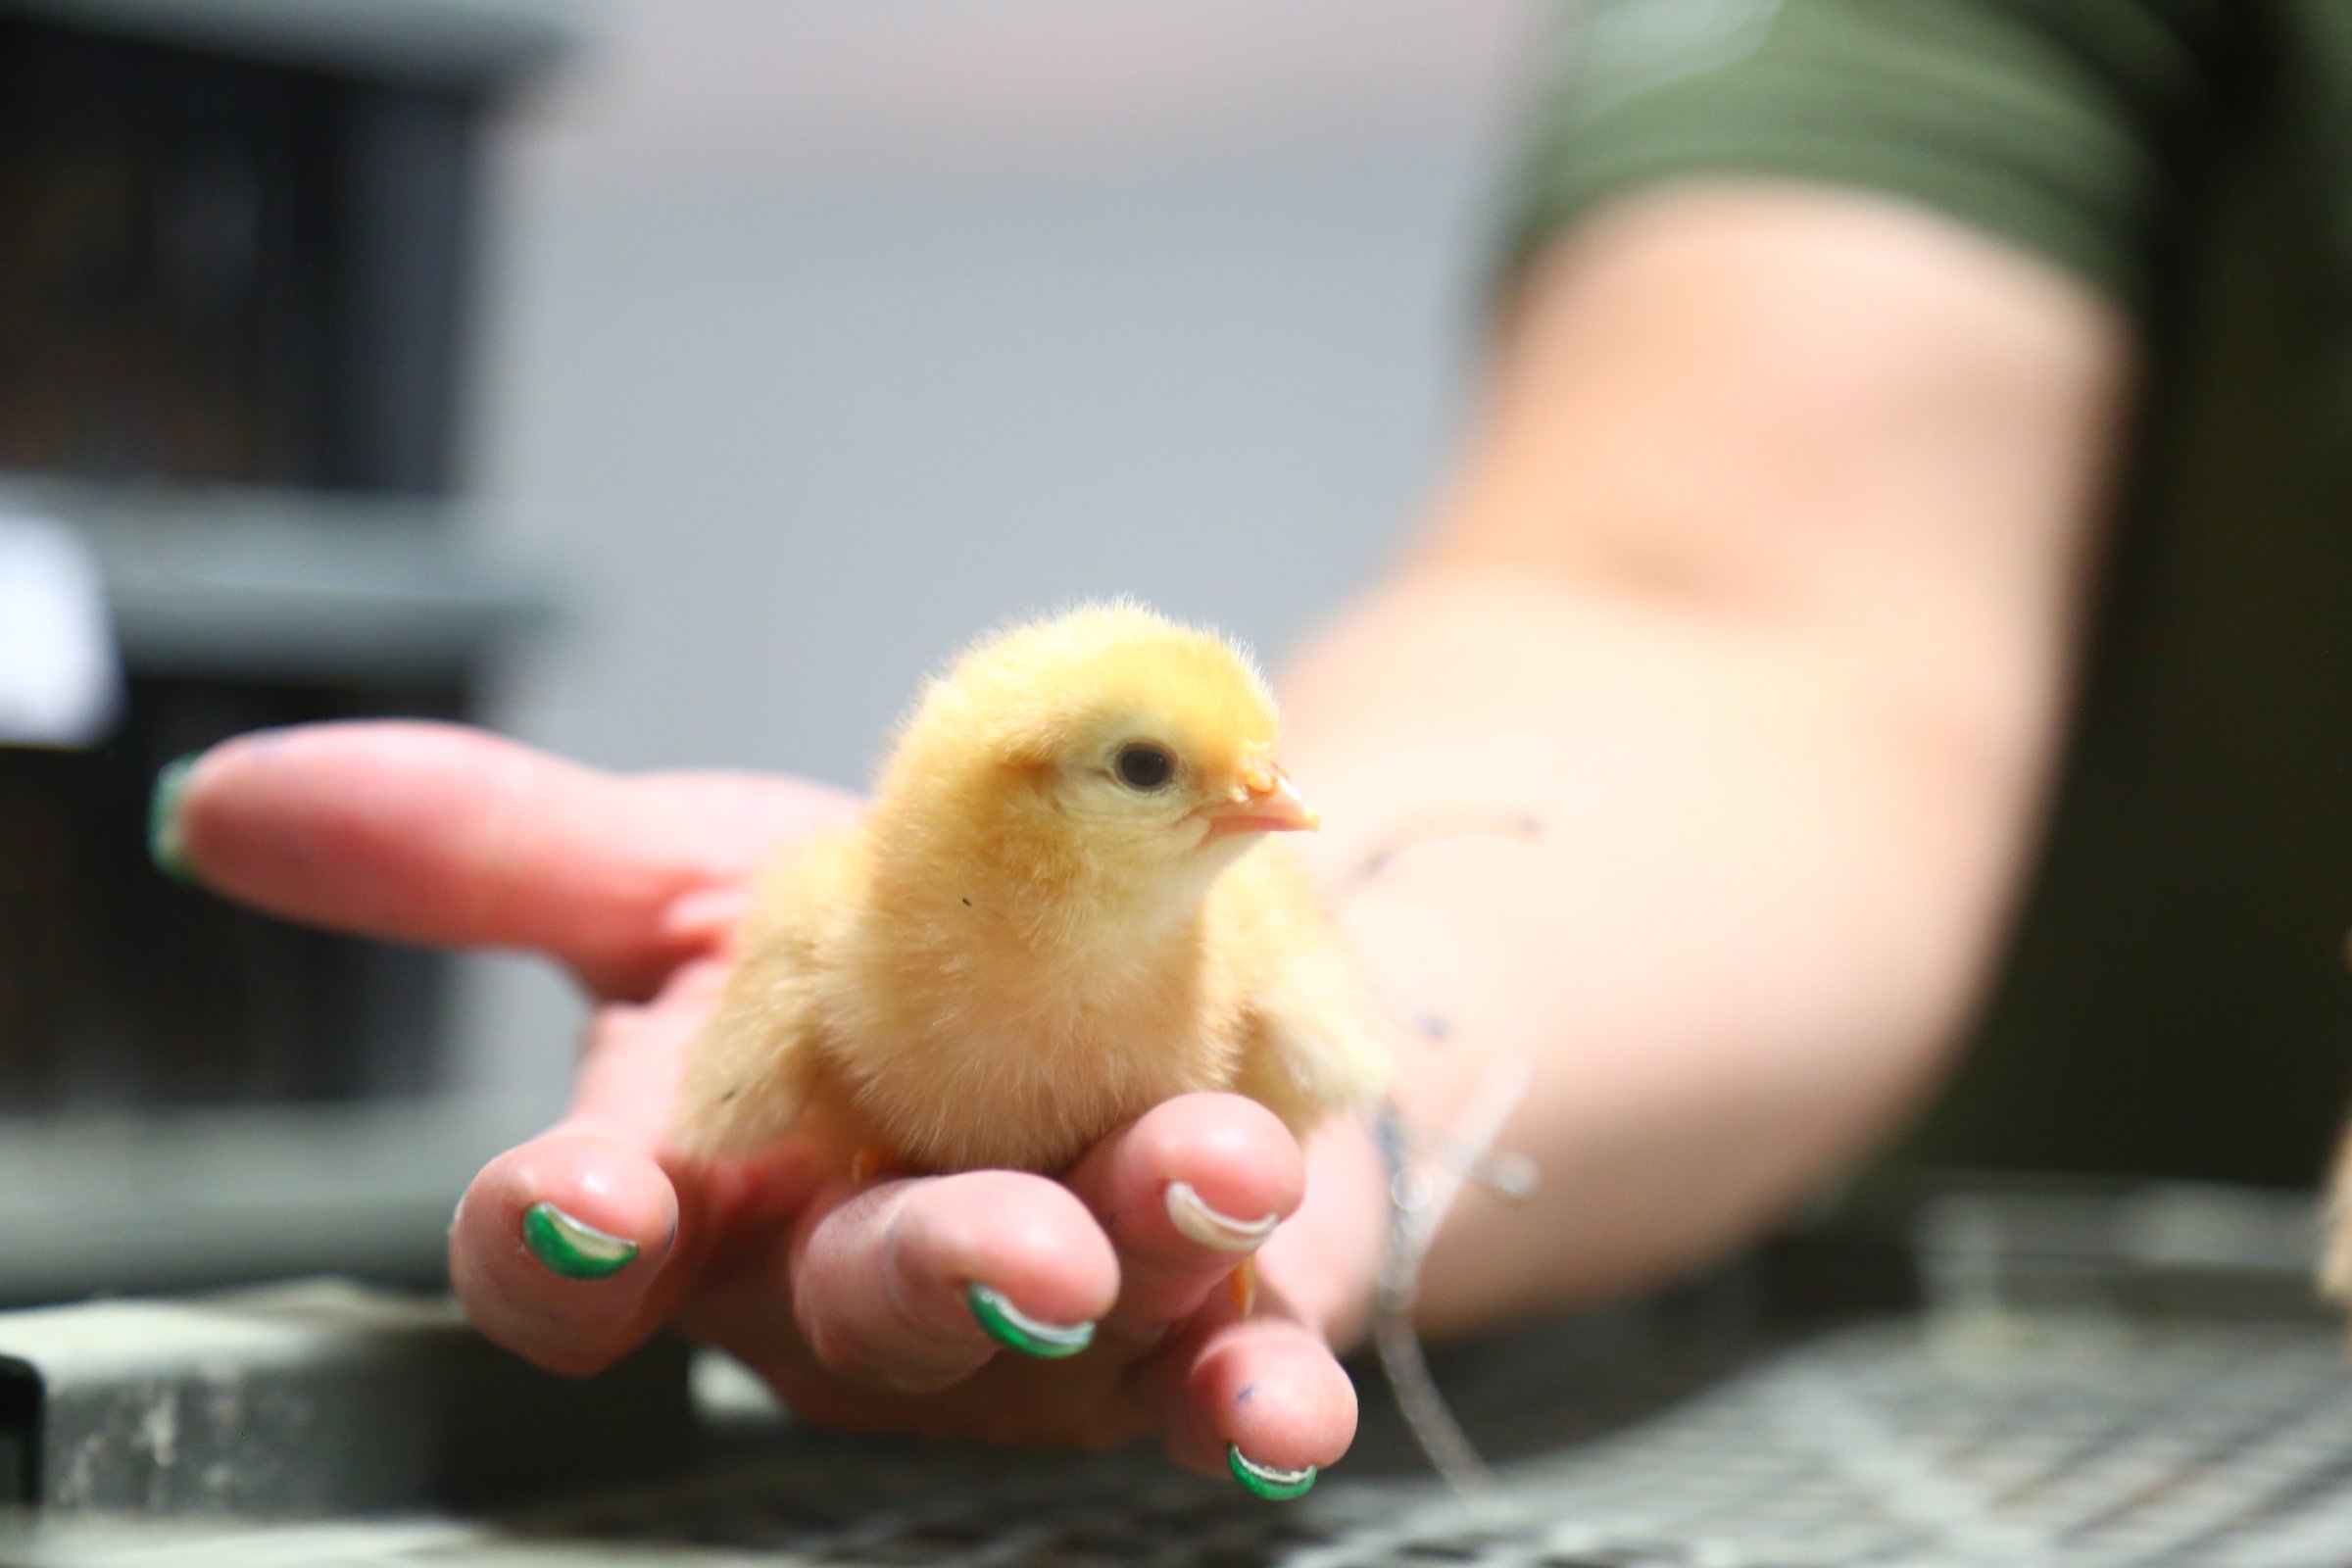 Youth poultry project provides lessons in animal husbandry